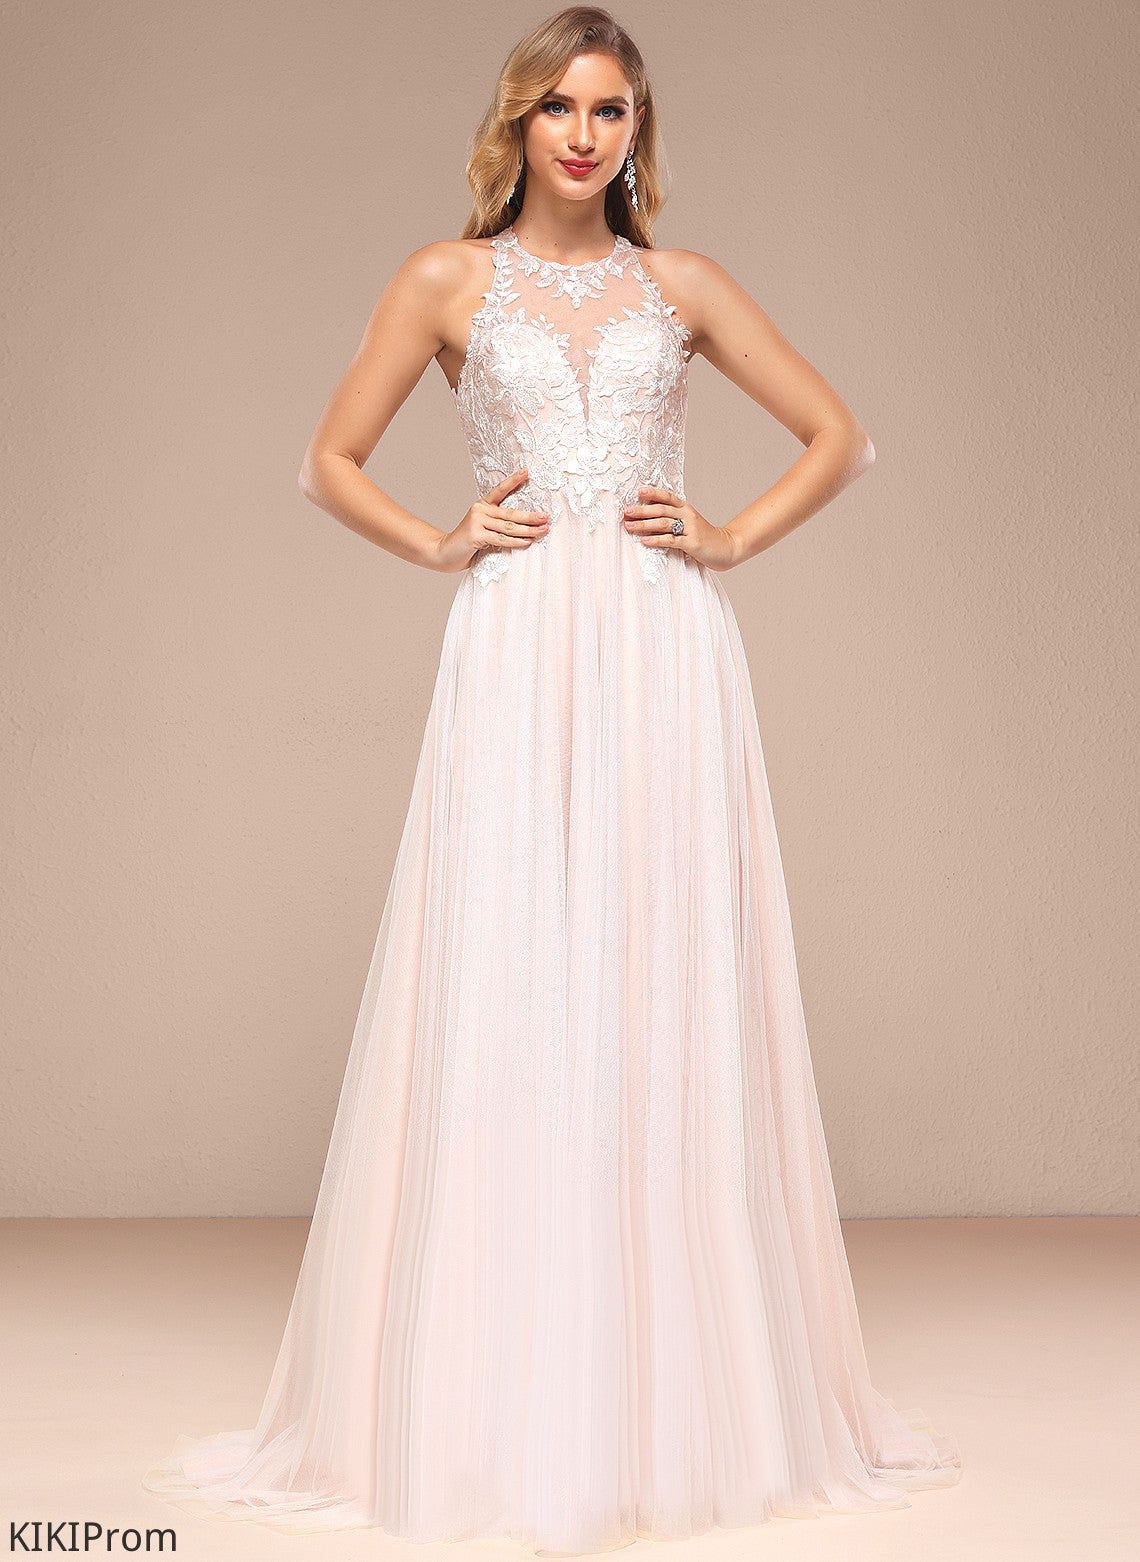 Iliana Lace Dress Sequins Wedding Wedding Dresses A-Line Train Beading With Halter Sweep Tulle